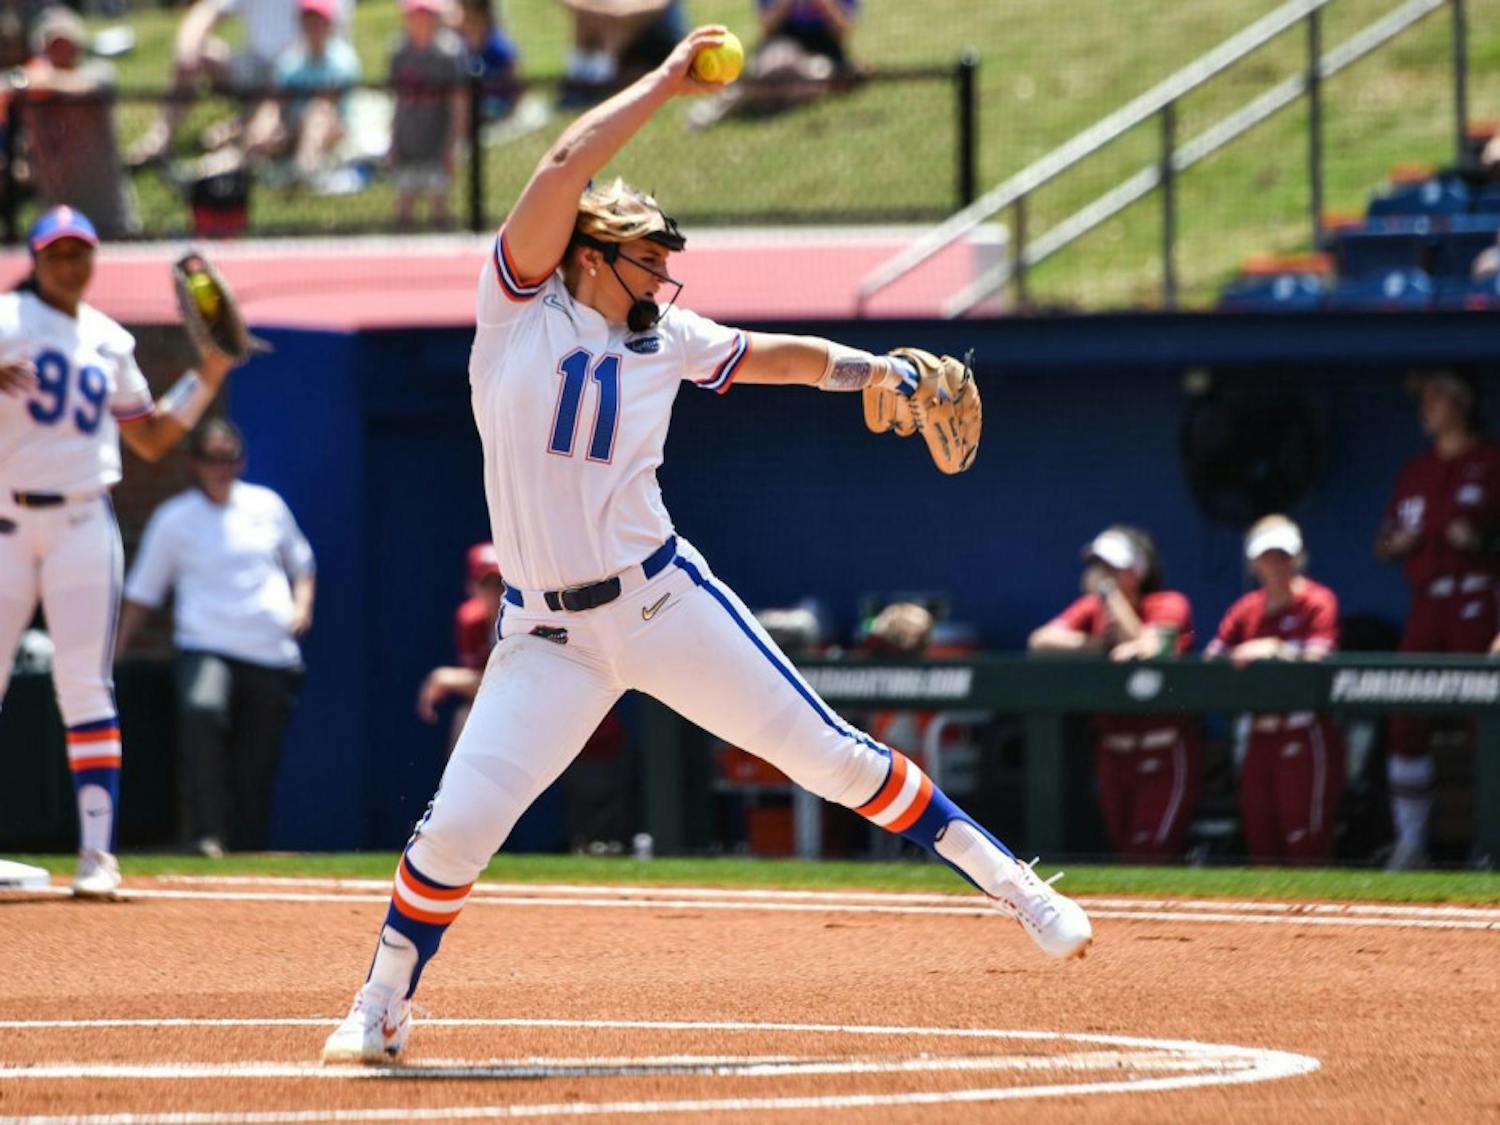 Pitcher Kelly Barnhill pitched all seven innings and struck out 11 batters in UF's win over Auburn on Friday.